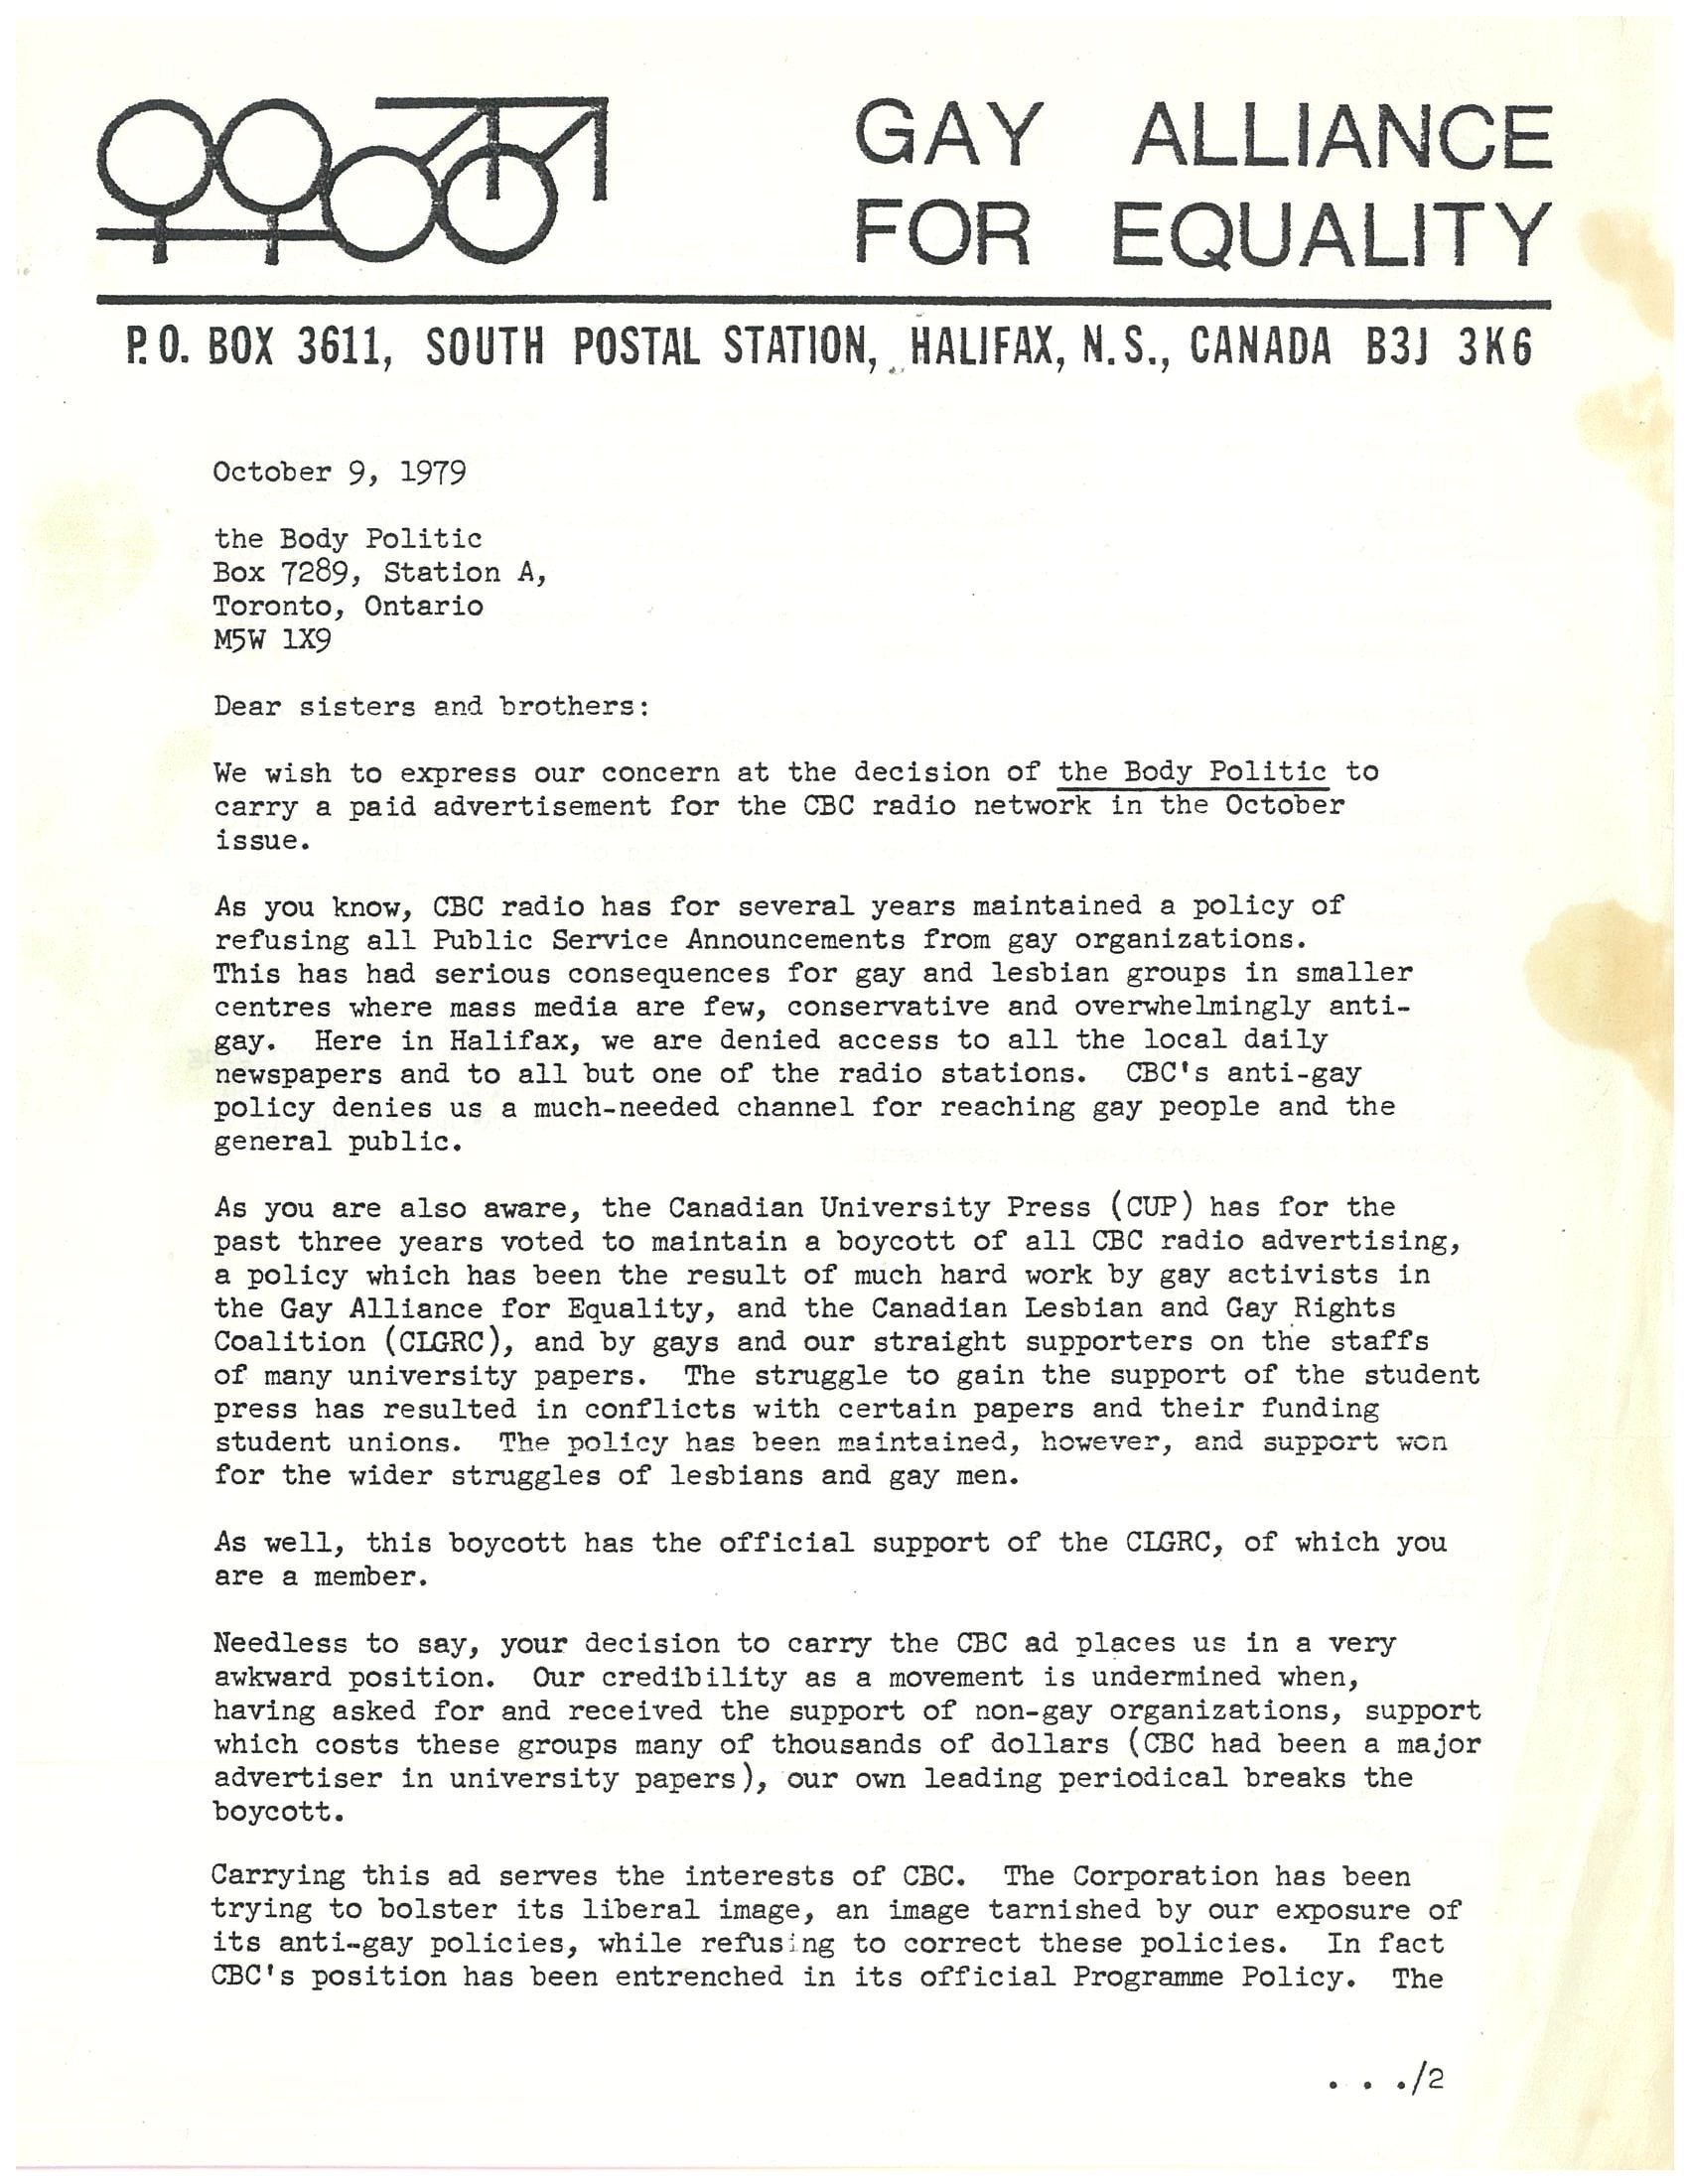 Typewritten letter on Gay Alliance for Equality letterhead, featuring gay and lesbian symbols and the organization’s name and address.